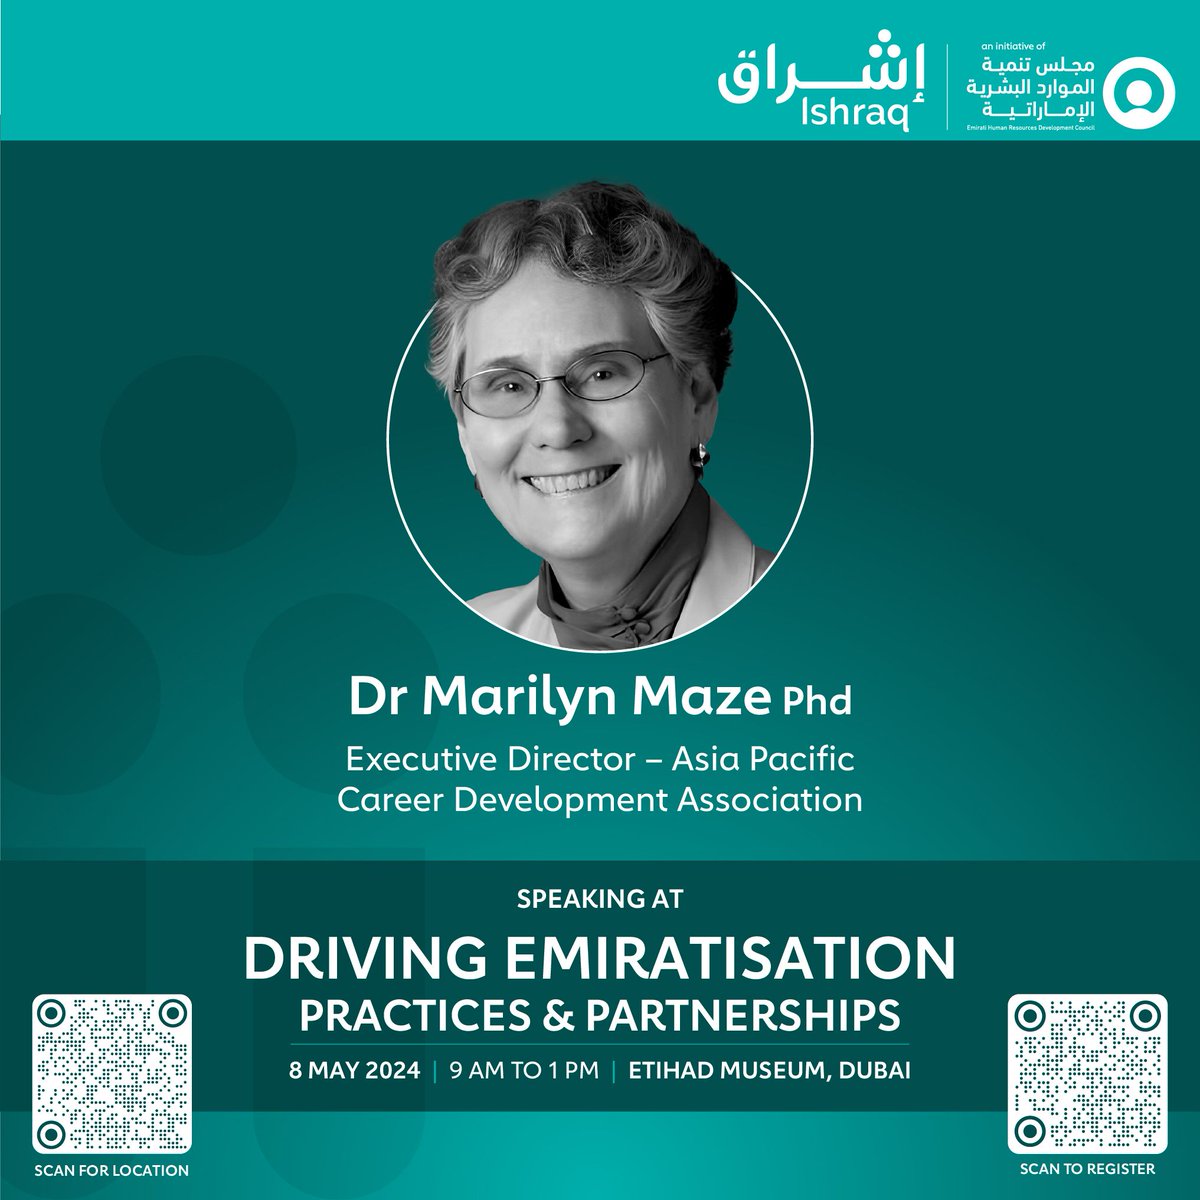 Dr. Marilyn Maze PhD, Executive Director of the Asia Pacific Career Development Association, will be speaking at Ishraq's fireside chat tomorrow (May 8th).

Register now: buff.ly/3UvchxQ

#ishraq #uaetalent #emiratisation #careermanagement #uae #uaecareers #careeradvice